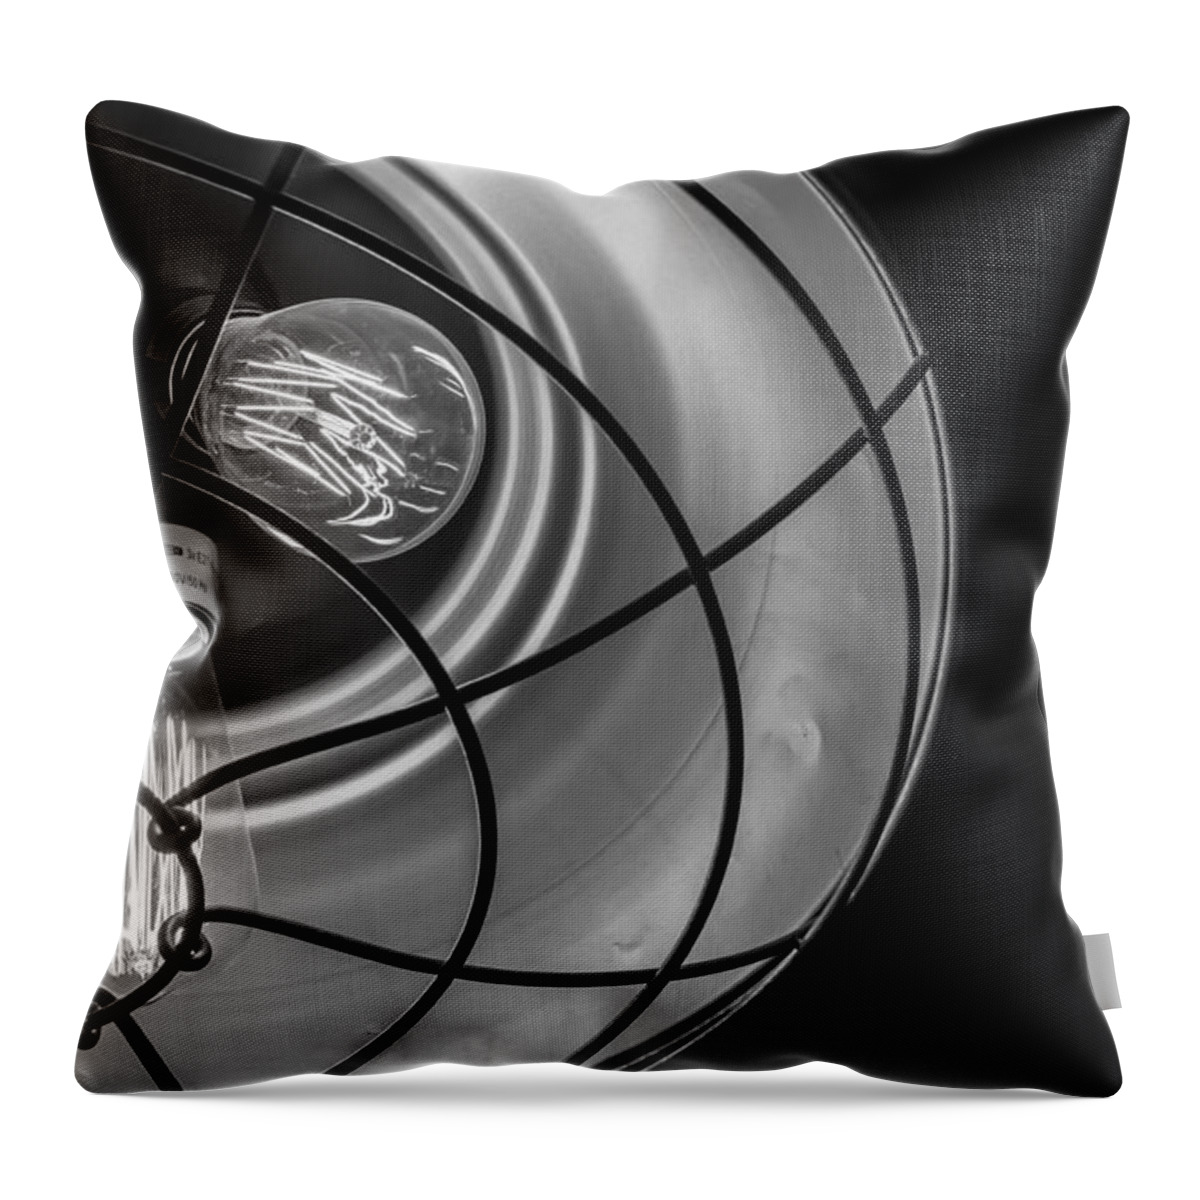 Background Throw Pillow featuring the photograph Two Burning Electric Bulbs by John Williams